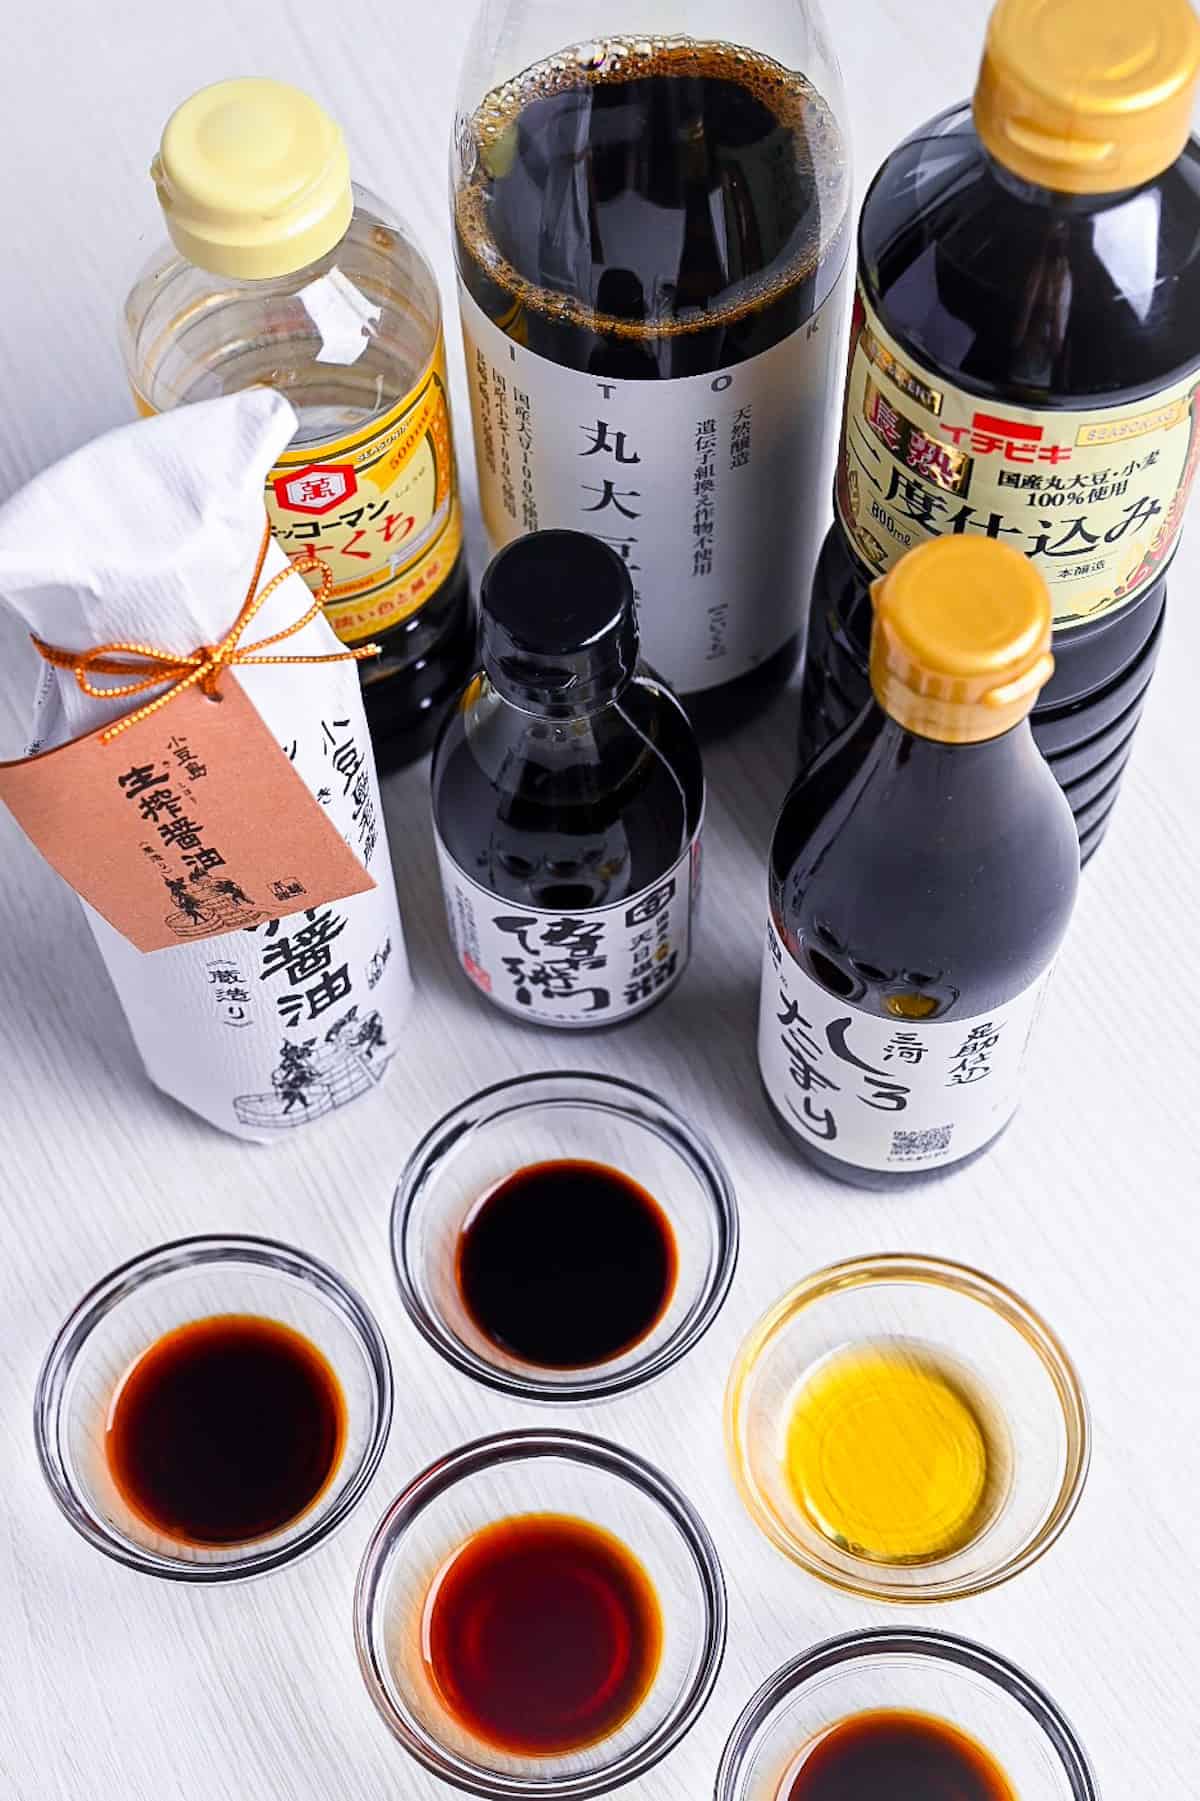 Six different kinds of shoyu (Japanese soy sauce)